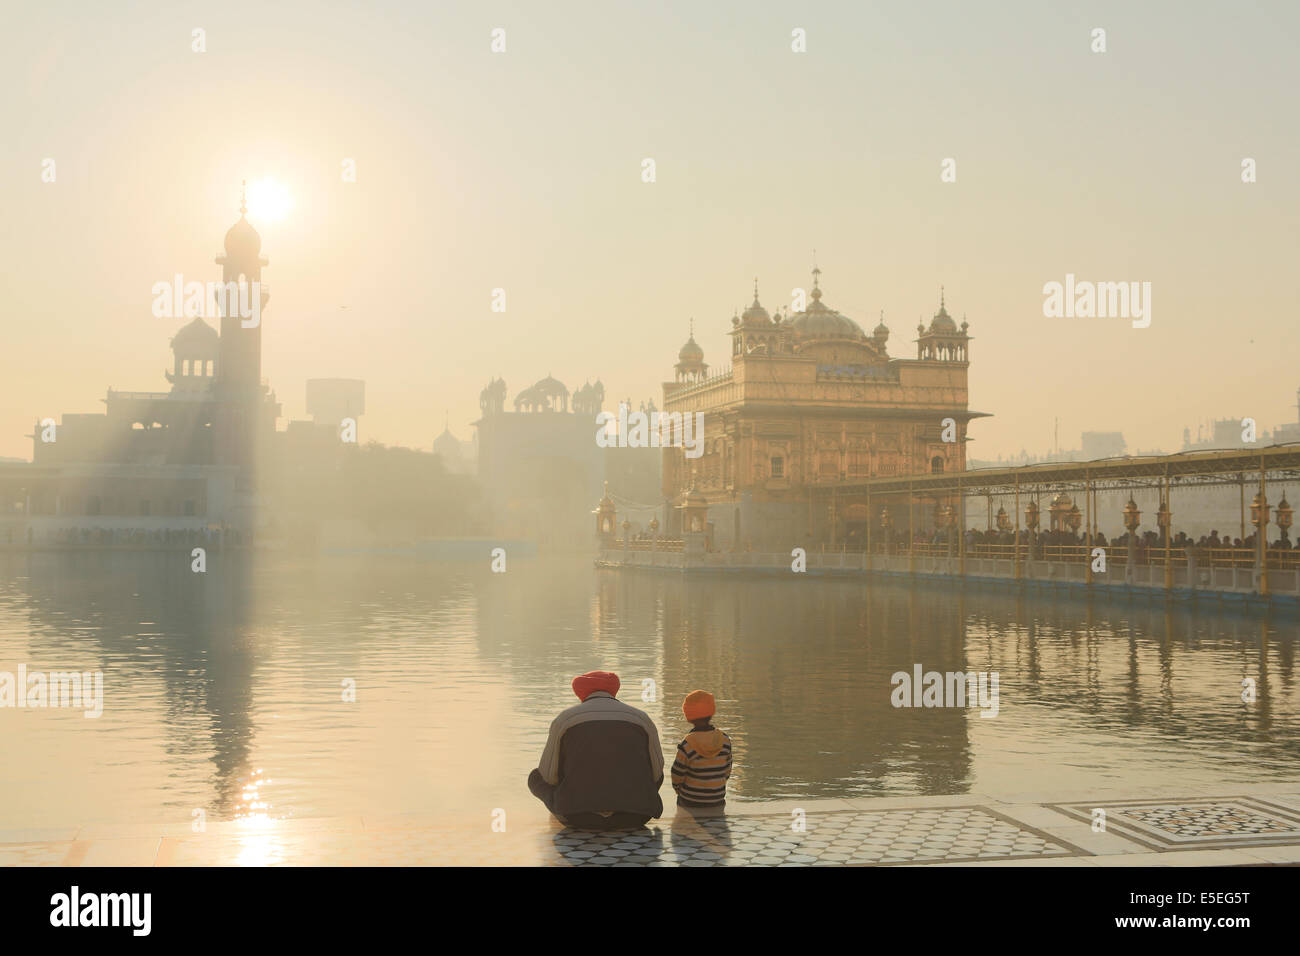 A father and son praying at the Sikh Golden Temple in Amritsar, Punjab, India Stock Photo